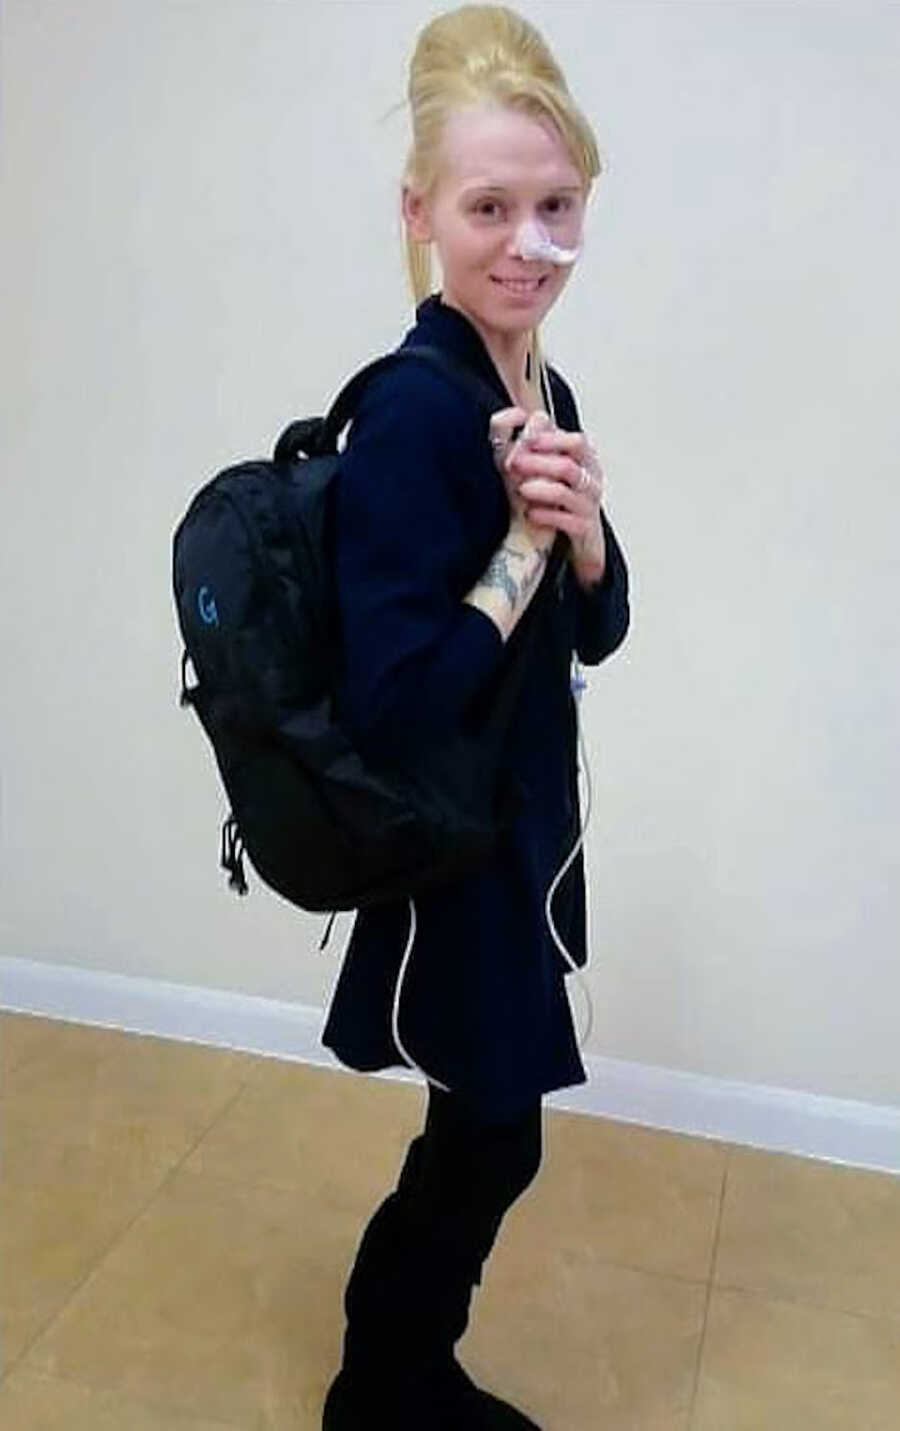 woman with chronic illness has feeding tube and backpack on